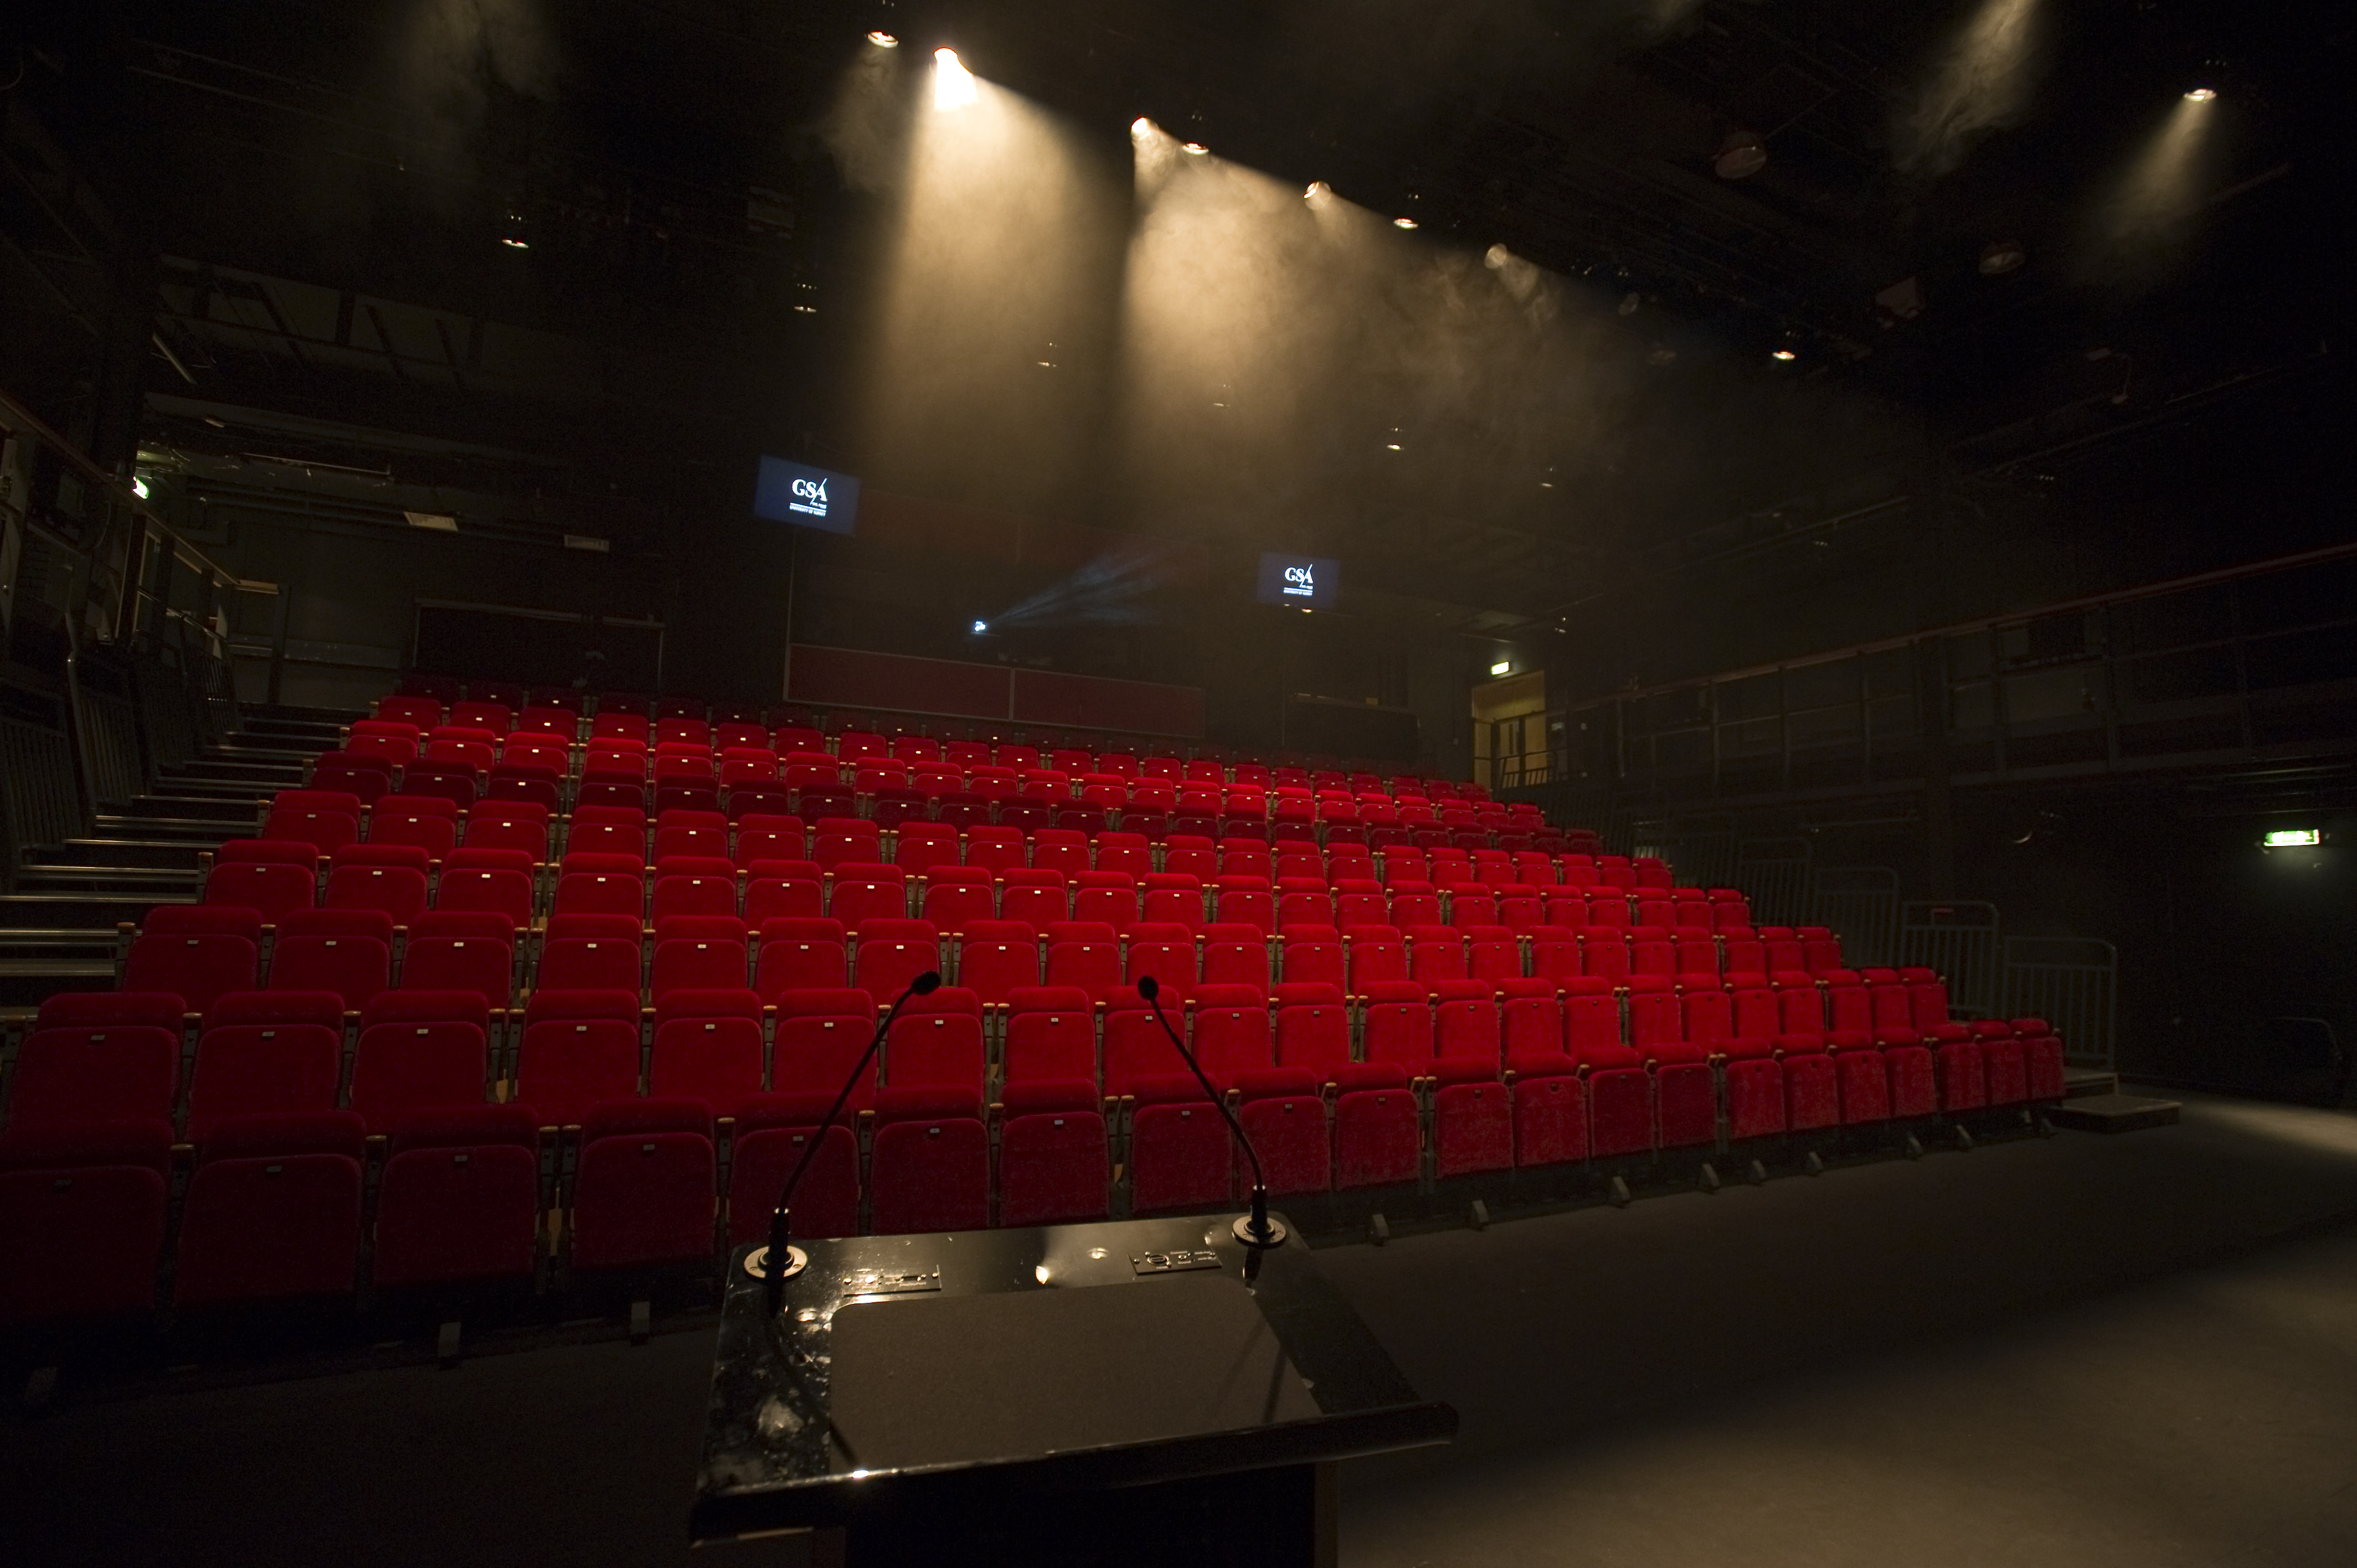 Theatre hall with red velvet seats and staging lights.